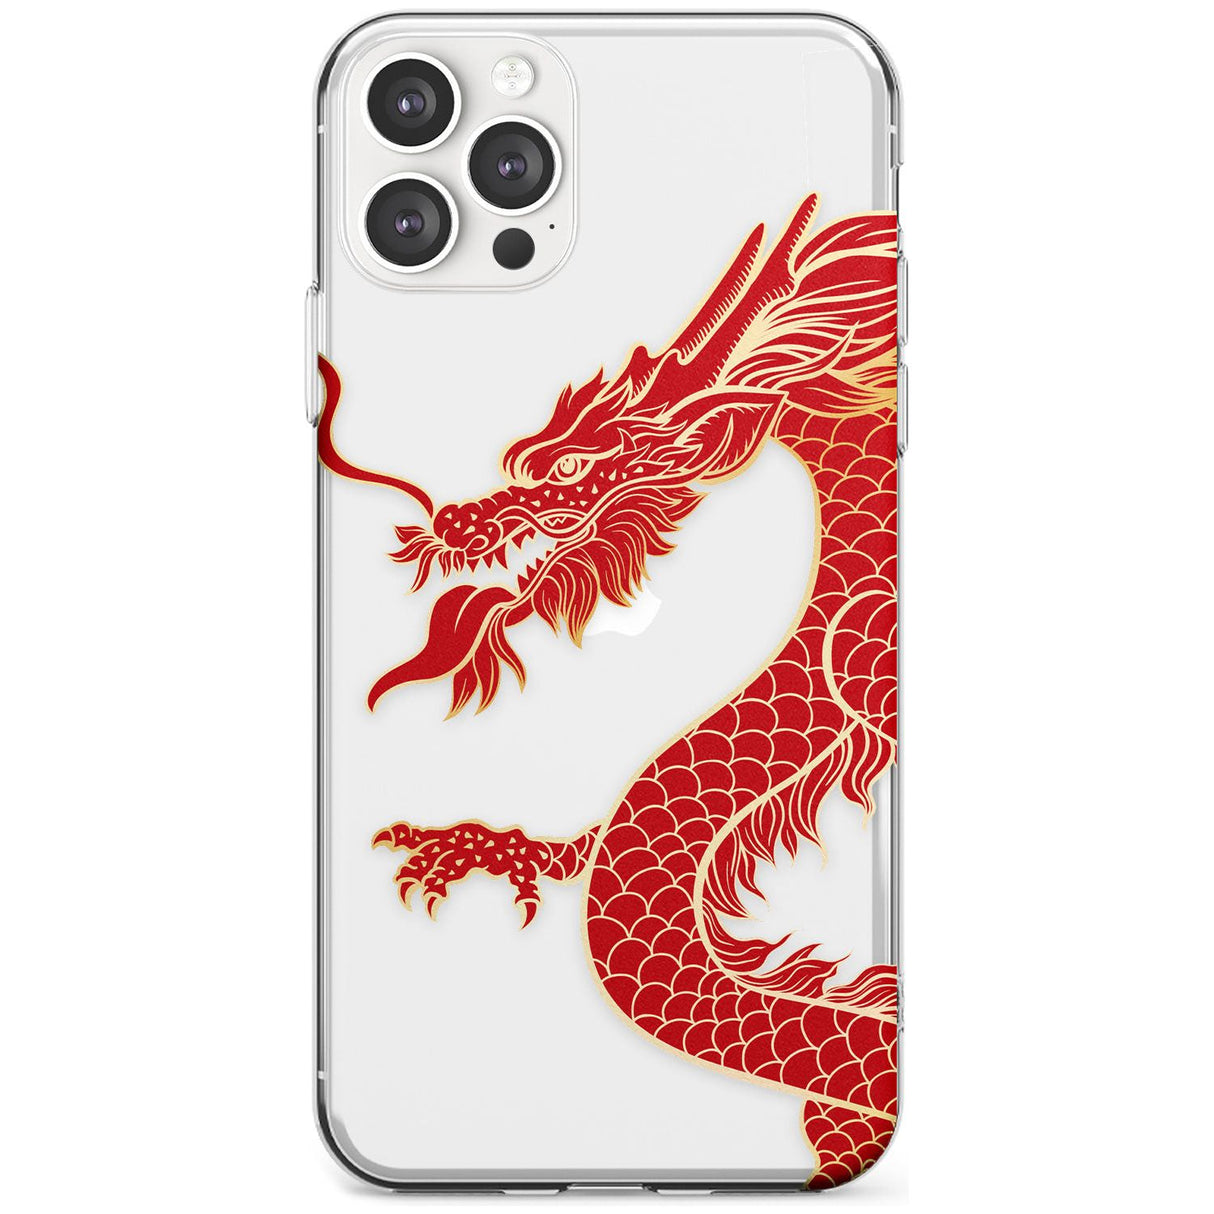 Large Red Dragon Phone Case iPhone 12 Pro Max / Clear Case,iPhone 12 Pro / Clear Case,iPhone 11 Pro Max / Clear Case,iPhone 11 Pro / Clear Case Blanc Space